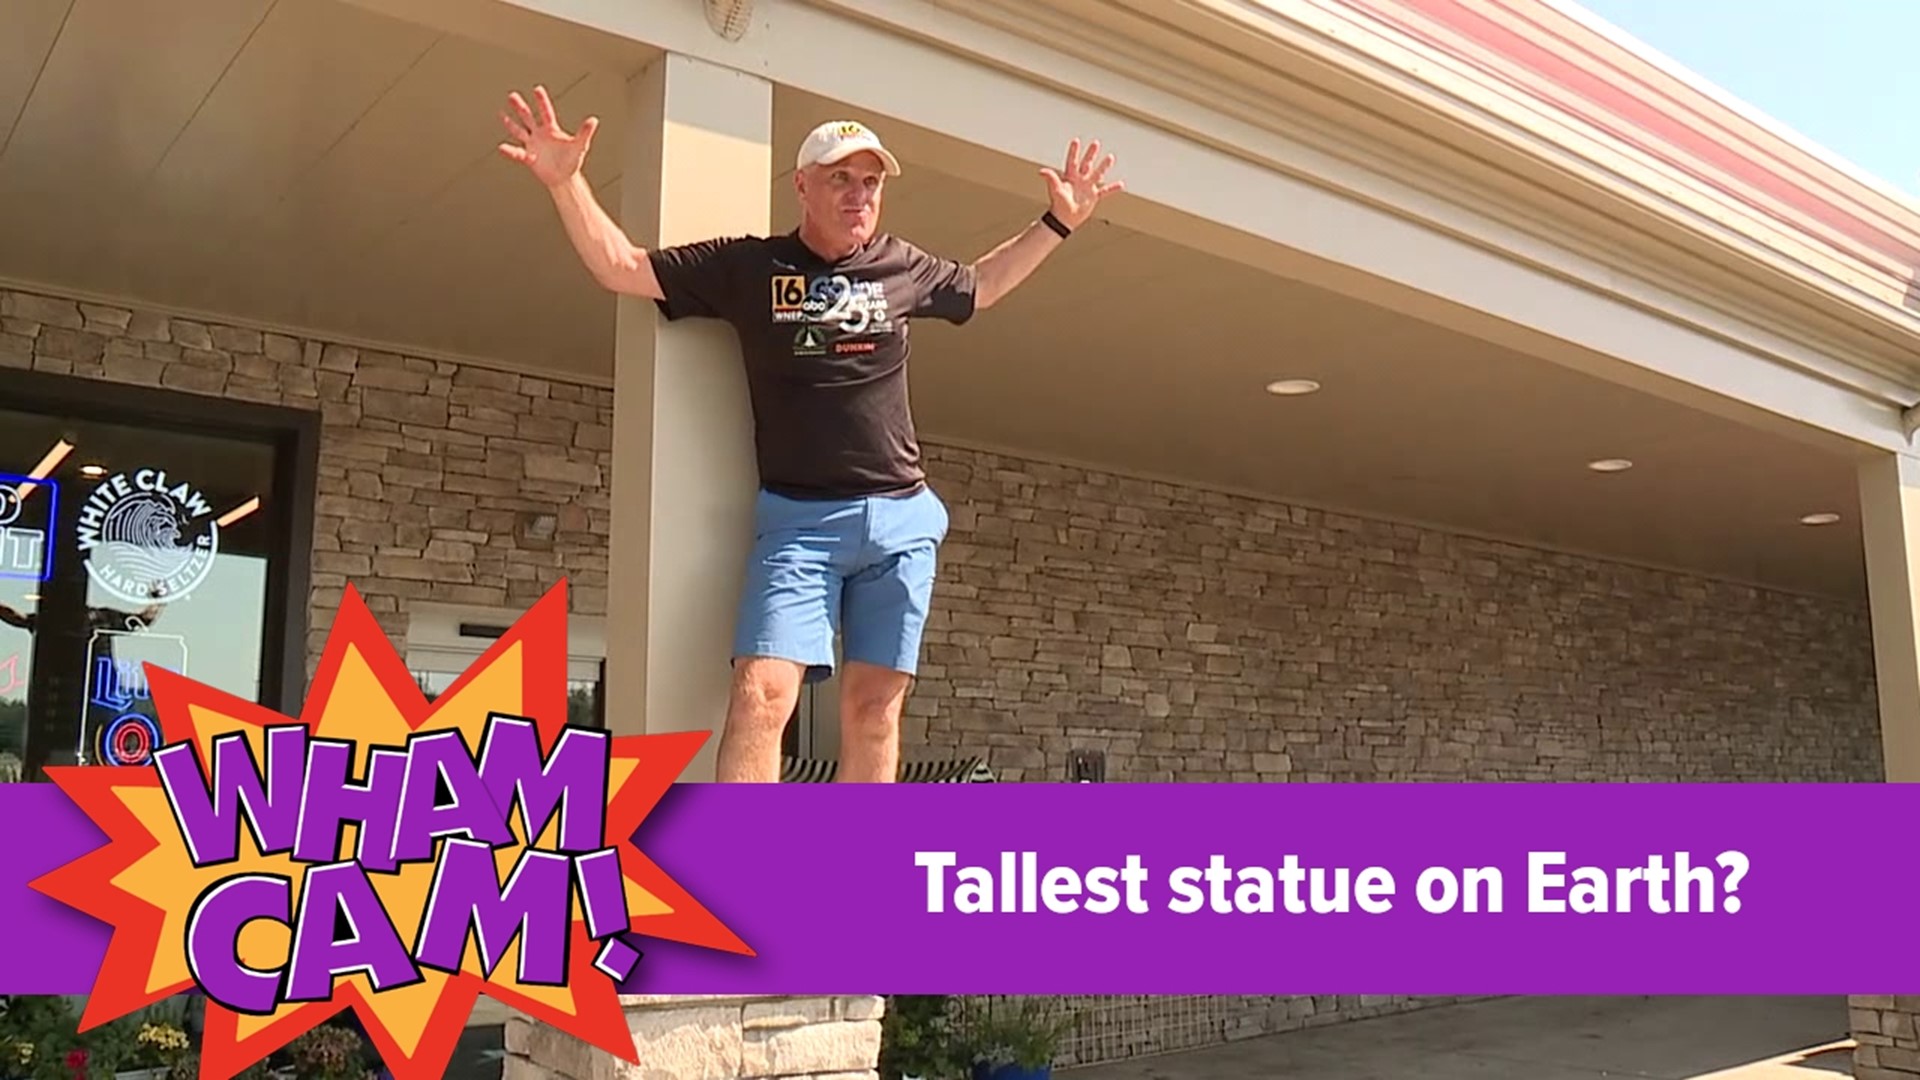 Ever wonder what the tallest statue on Earth is? Joe and his gnome statue headed to ShopRite in Moosic to find out in this week's Wham Cam.